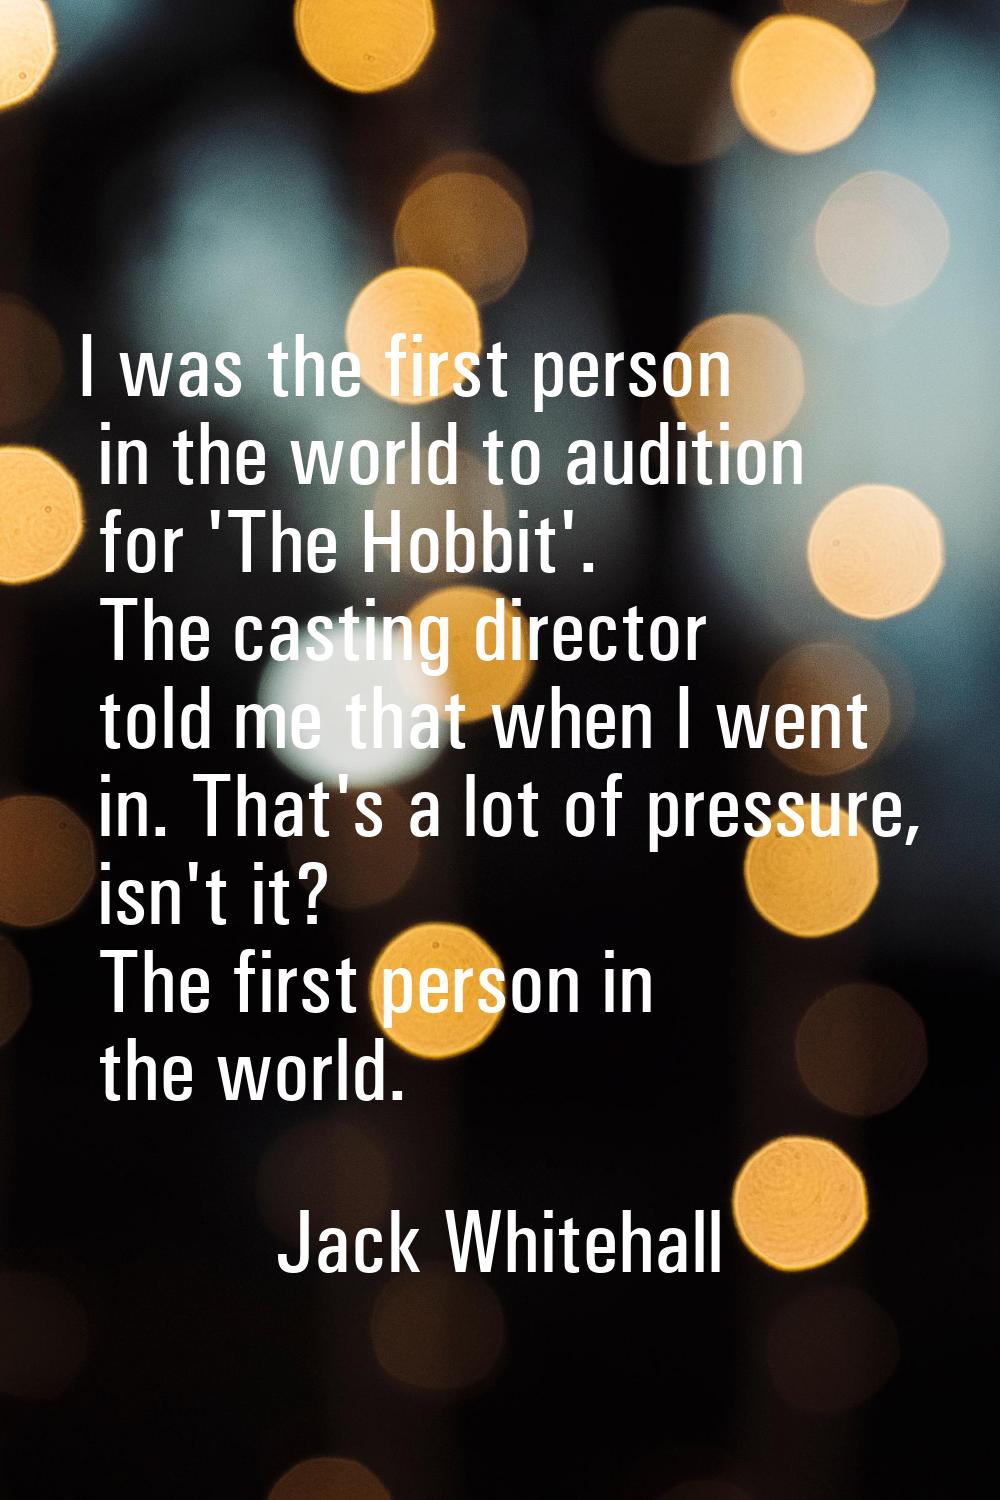 I was the first person in the world to audition for 'The Hobbit'. The casting director told me that